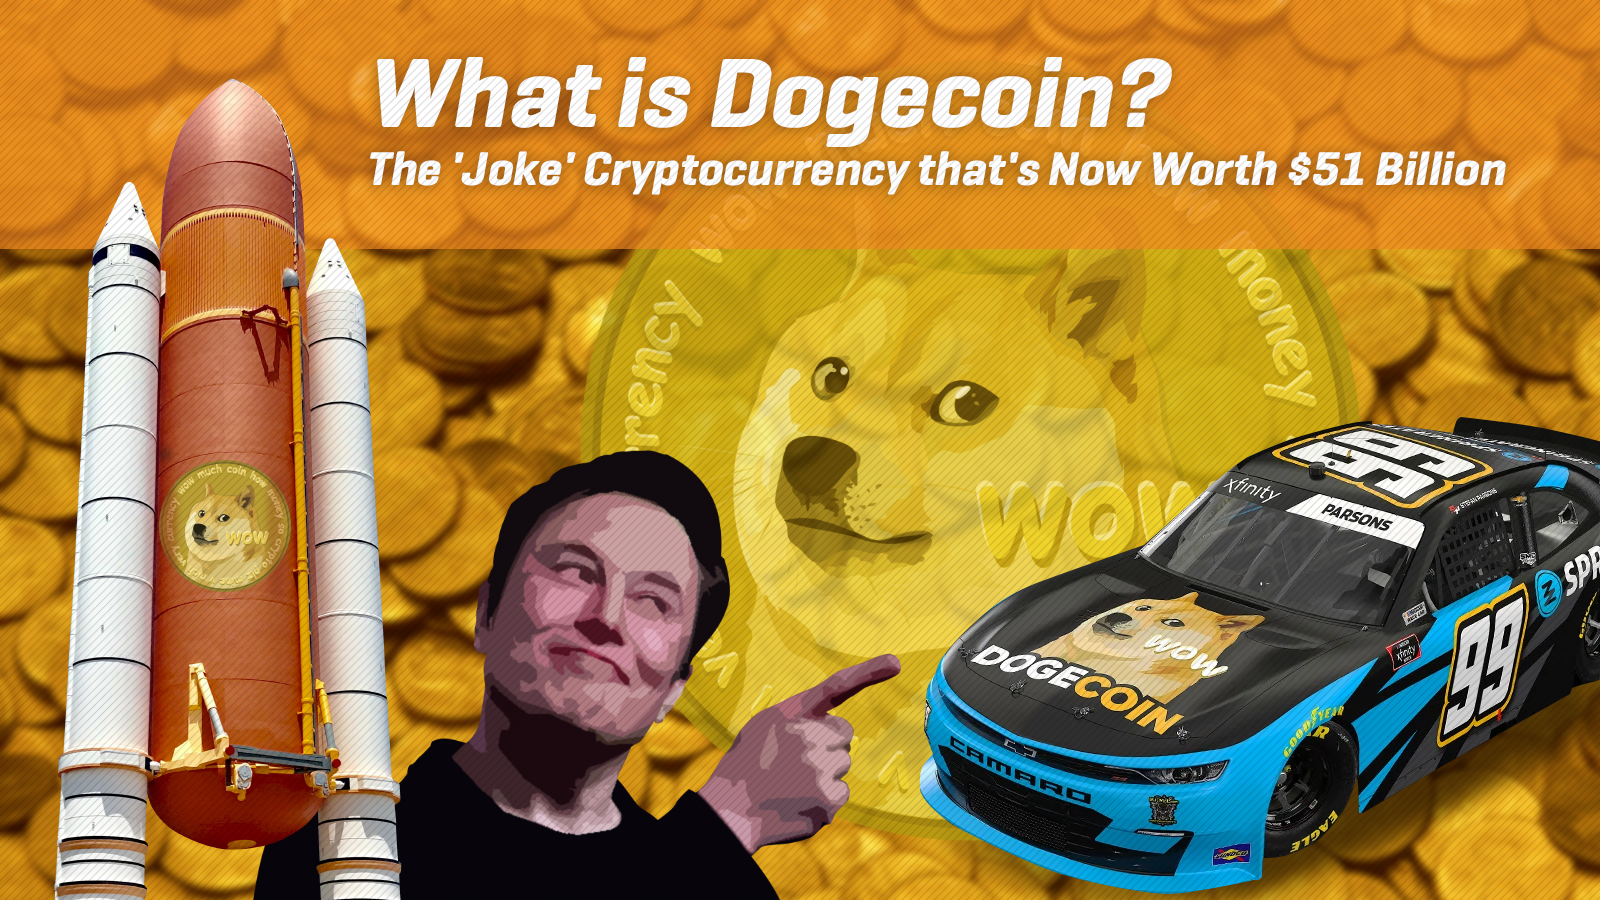 What is Dogecoin?: The 'Joke' Cryptocurrency that’s Worth $51 Billion